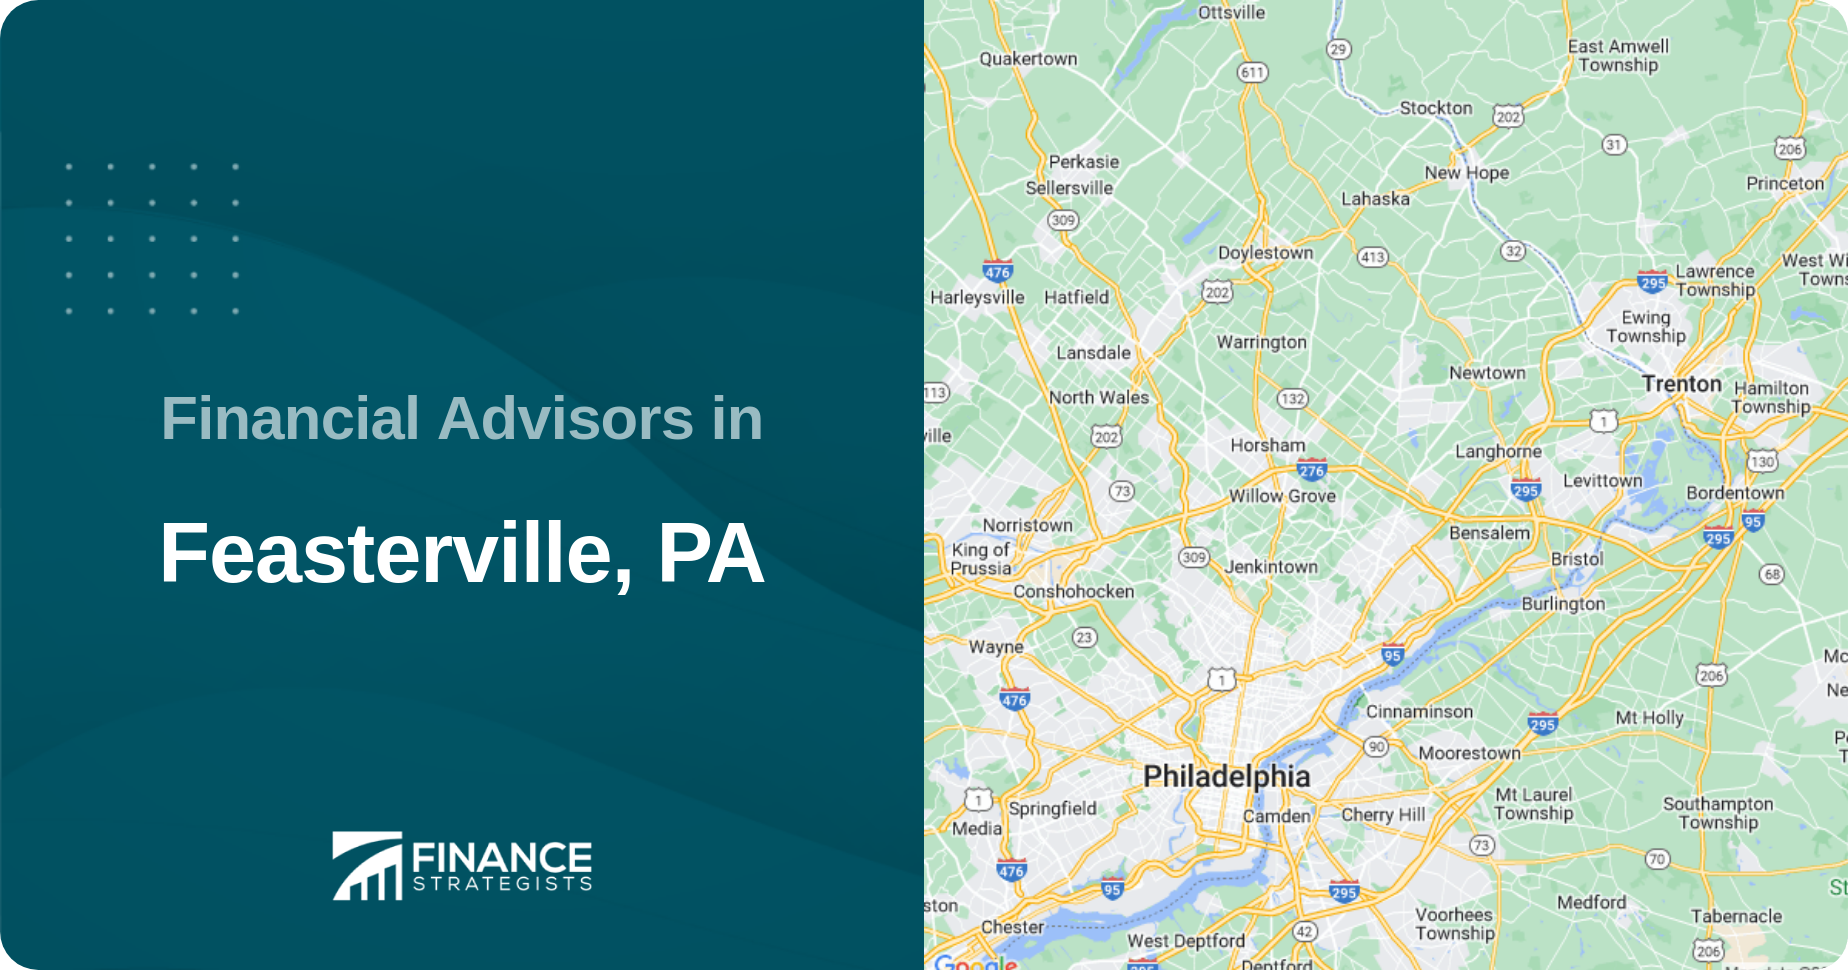 Financial Advisors in Feasterville, PA